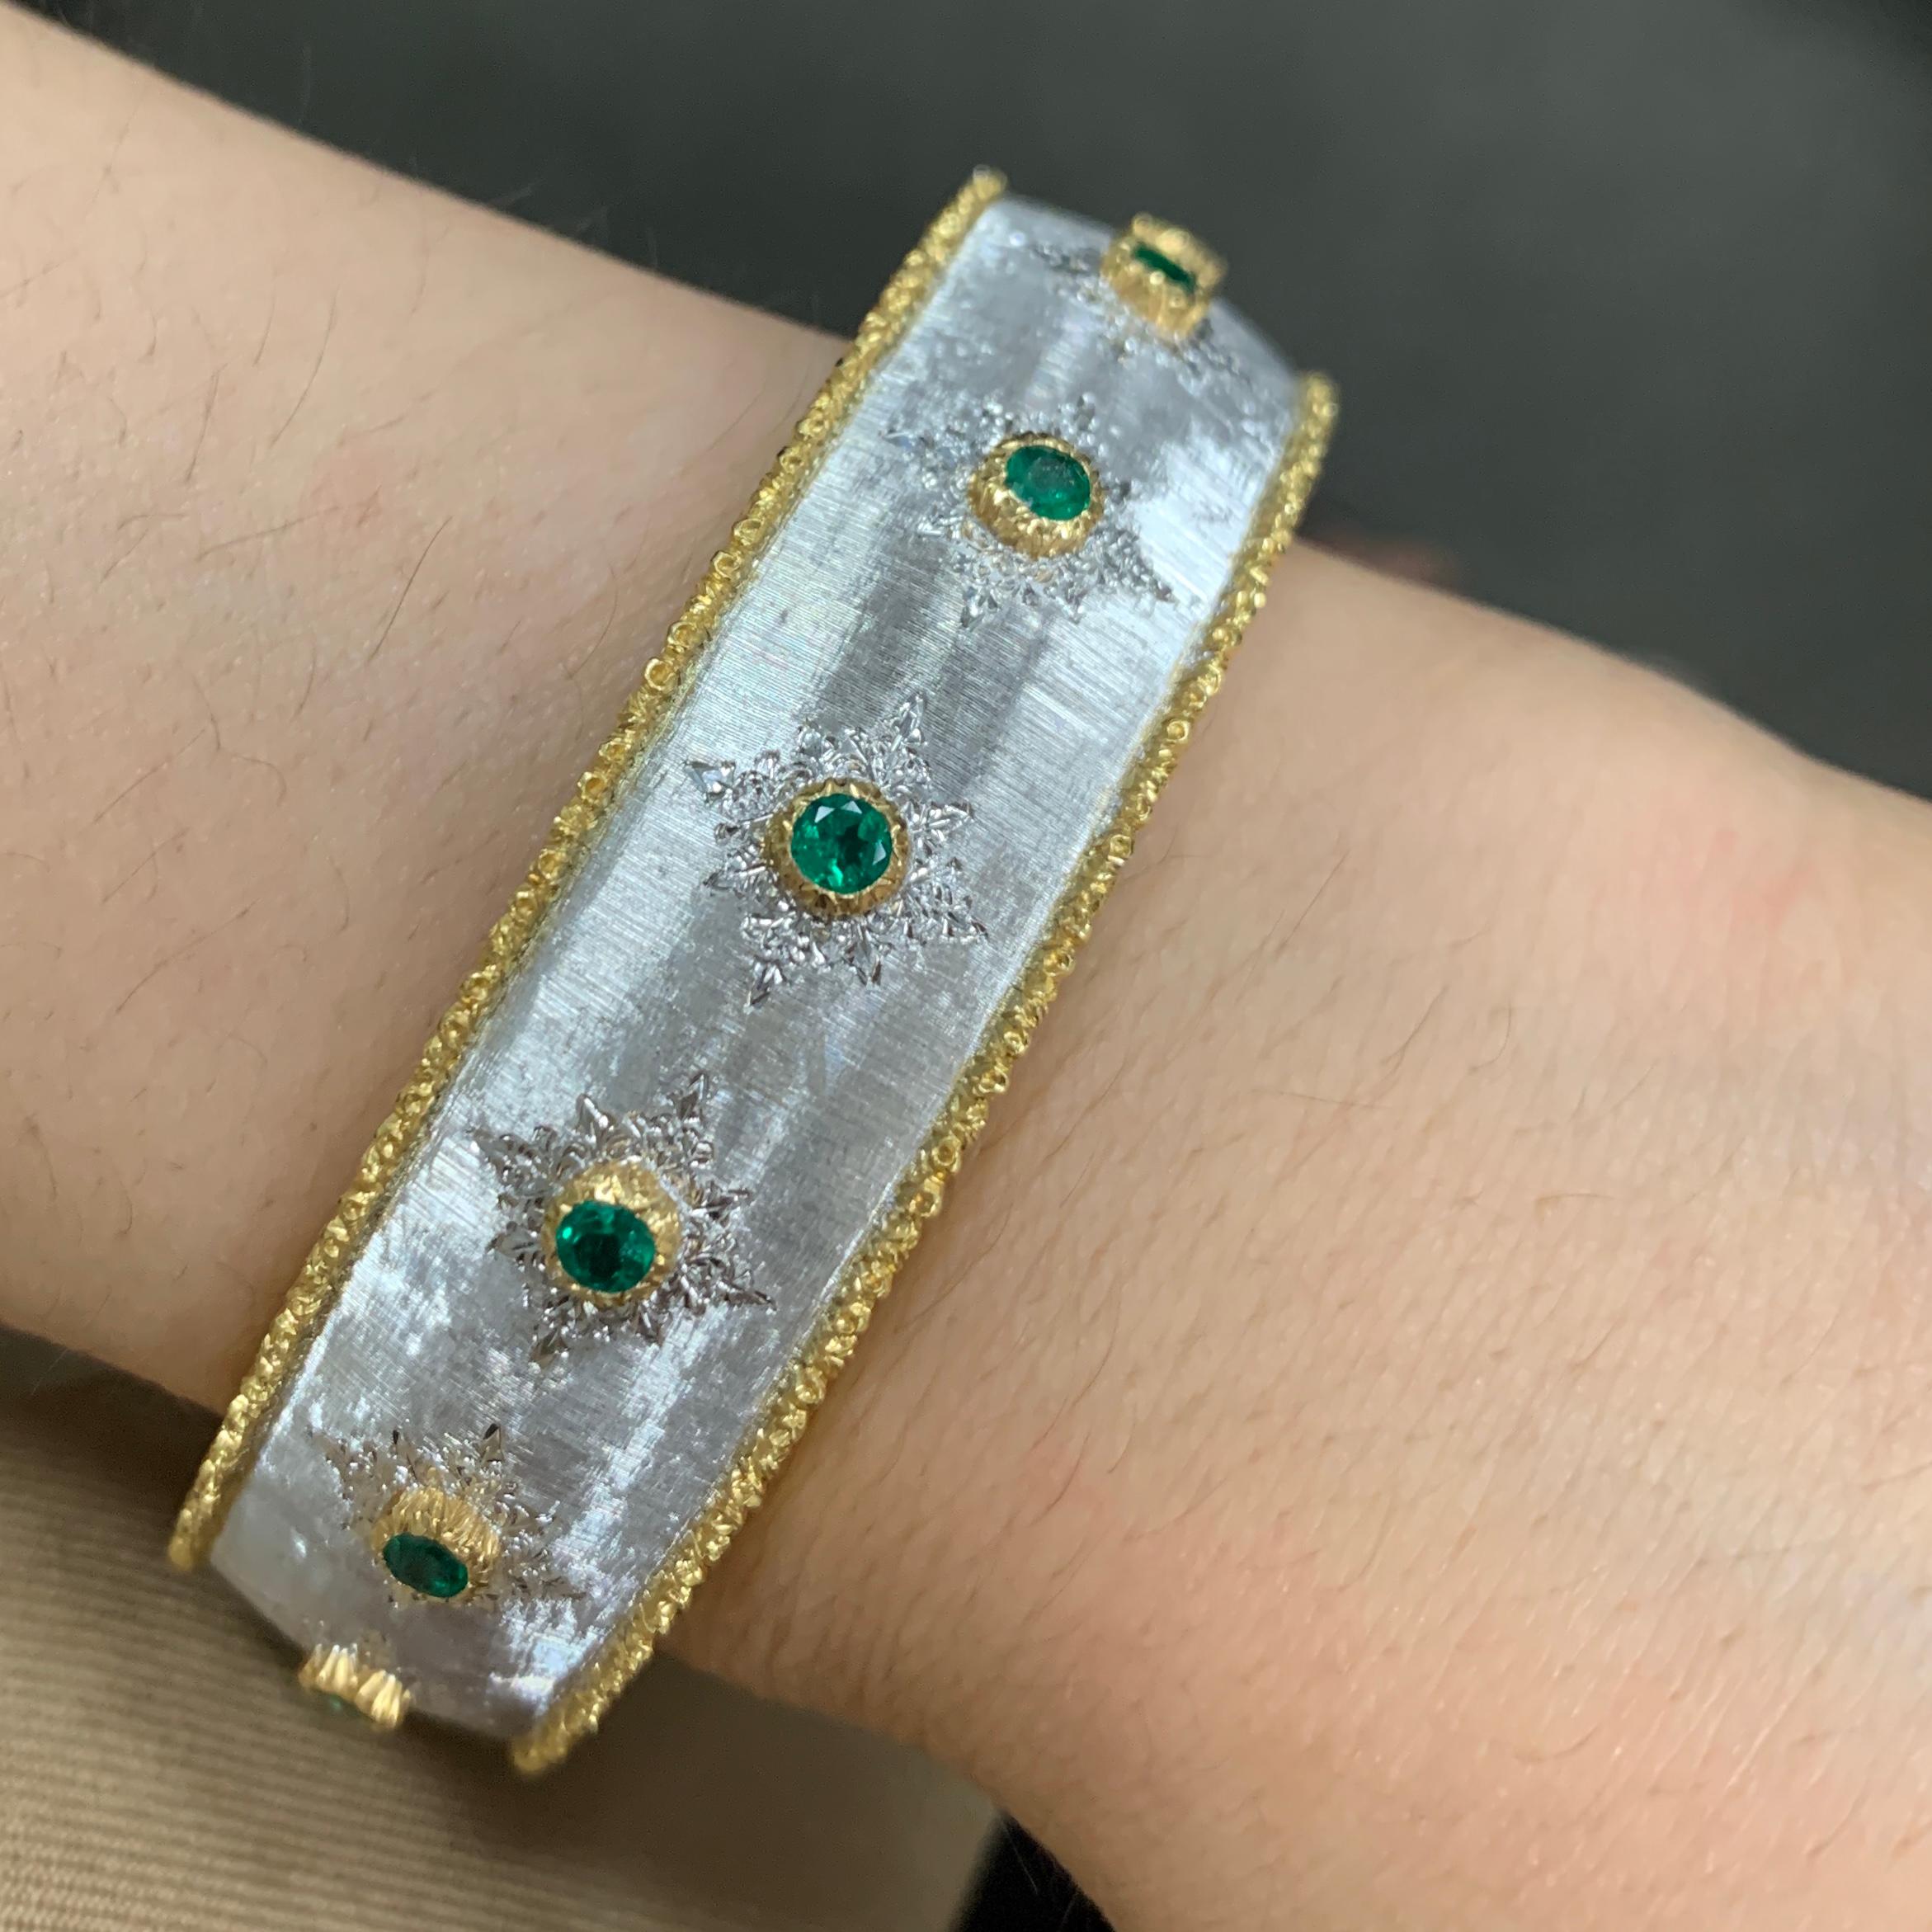 Women's Buccellati White and Yellow Gold Bangle Bracelet with Emeralds